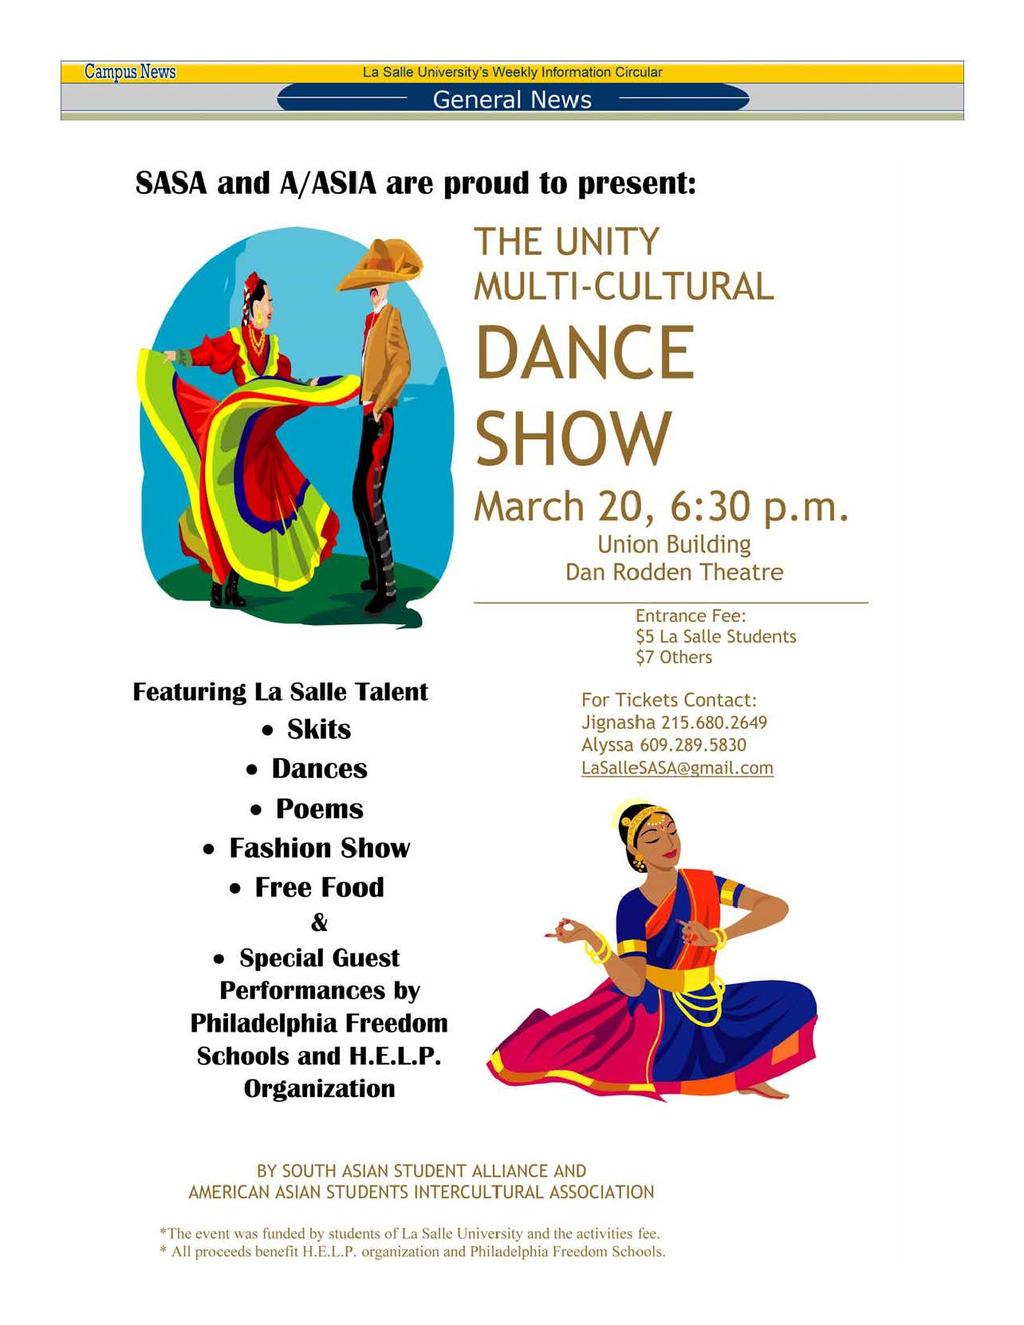 Cam usnews General News Page 13 SASA and A/ ASIIA are proud to present: THE UNITY MULTI-CULTURAL DANCE SHOW March 20, 6:30p.m. Union Building Dan Rodden Theatre Entrance Fee: $5 La Salle Students $7